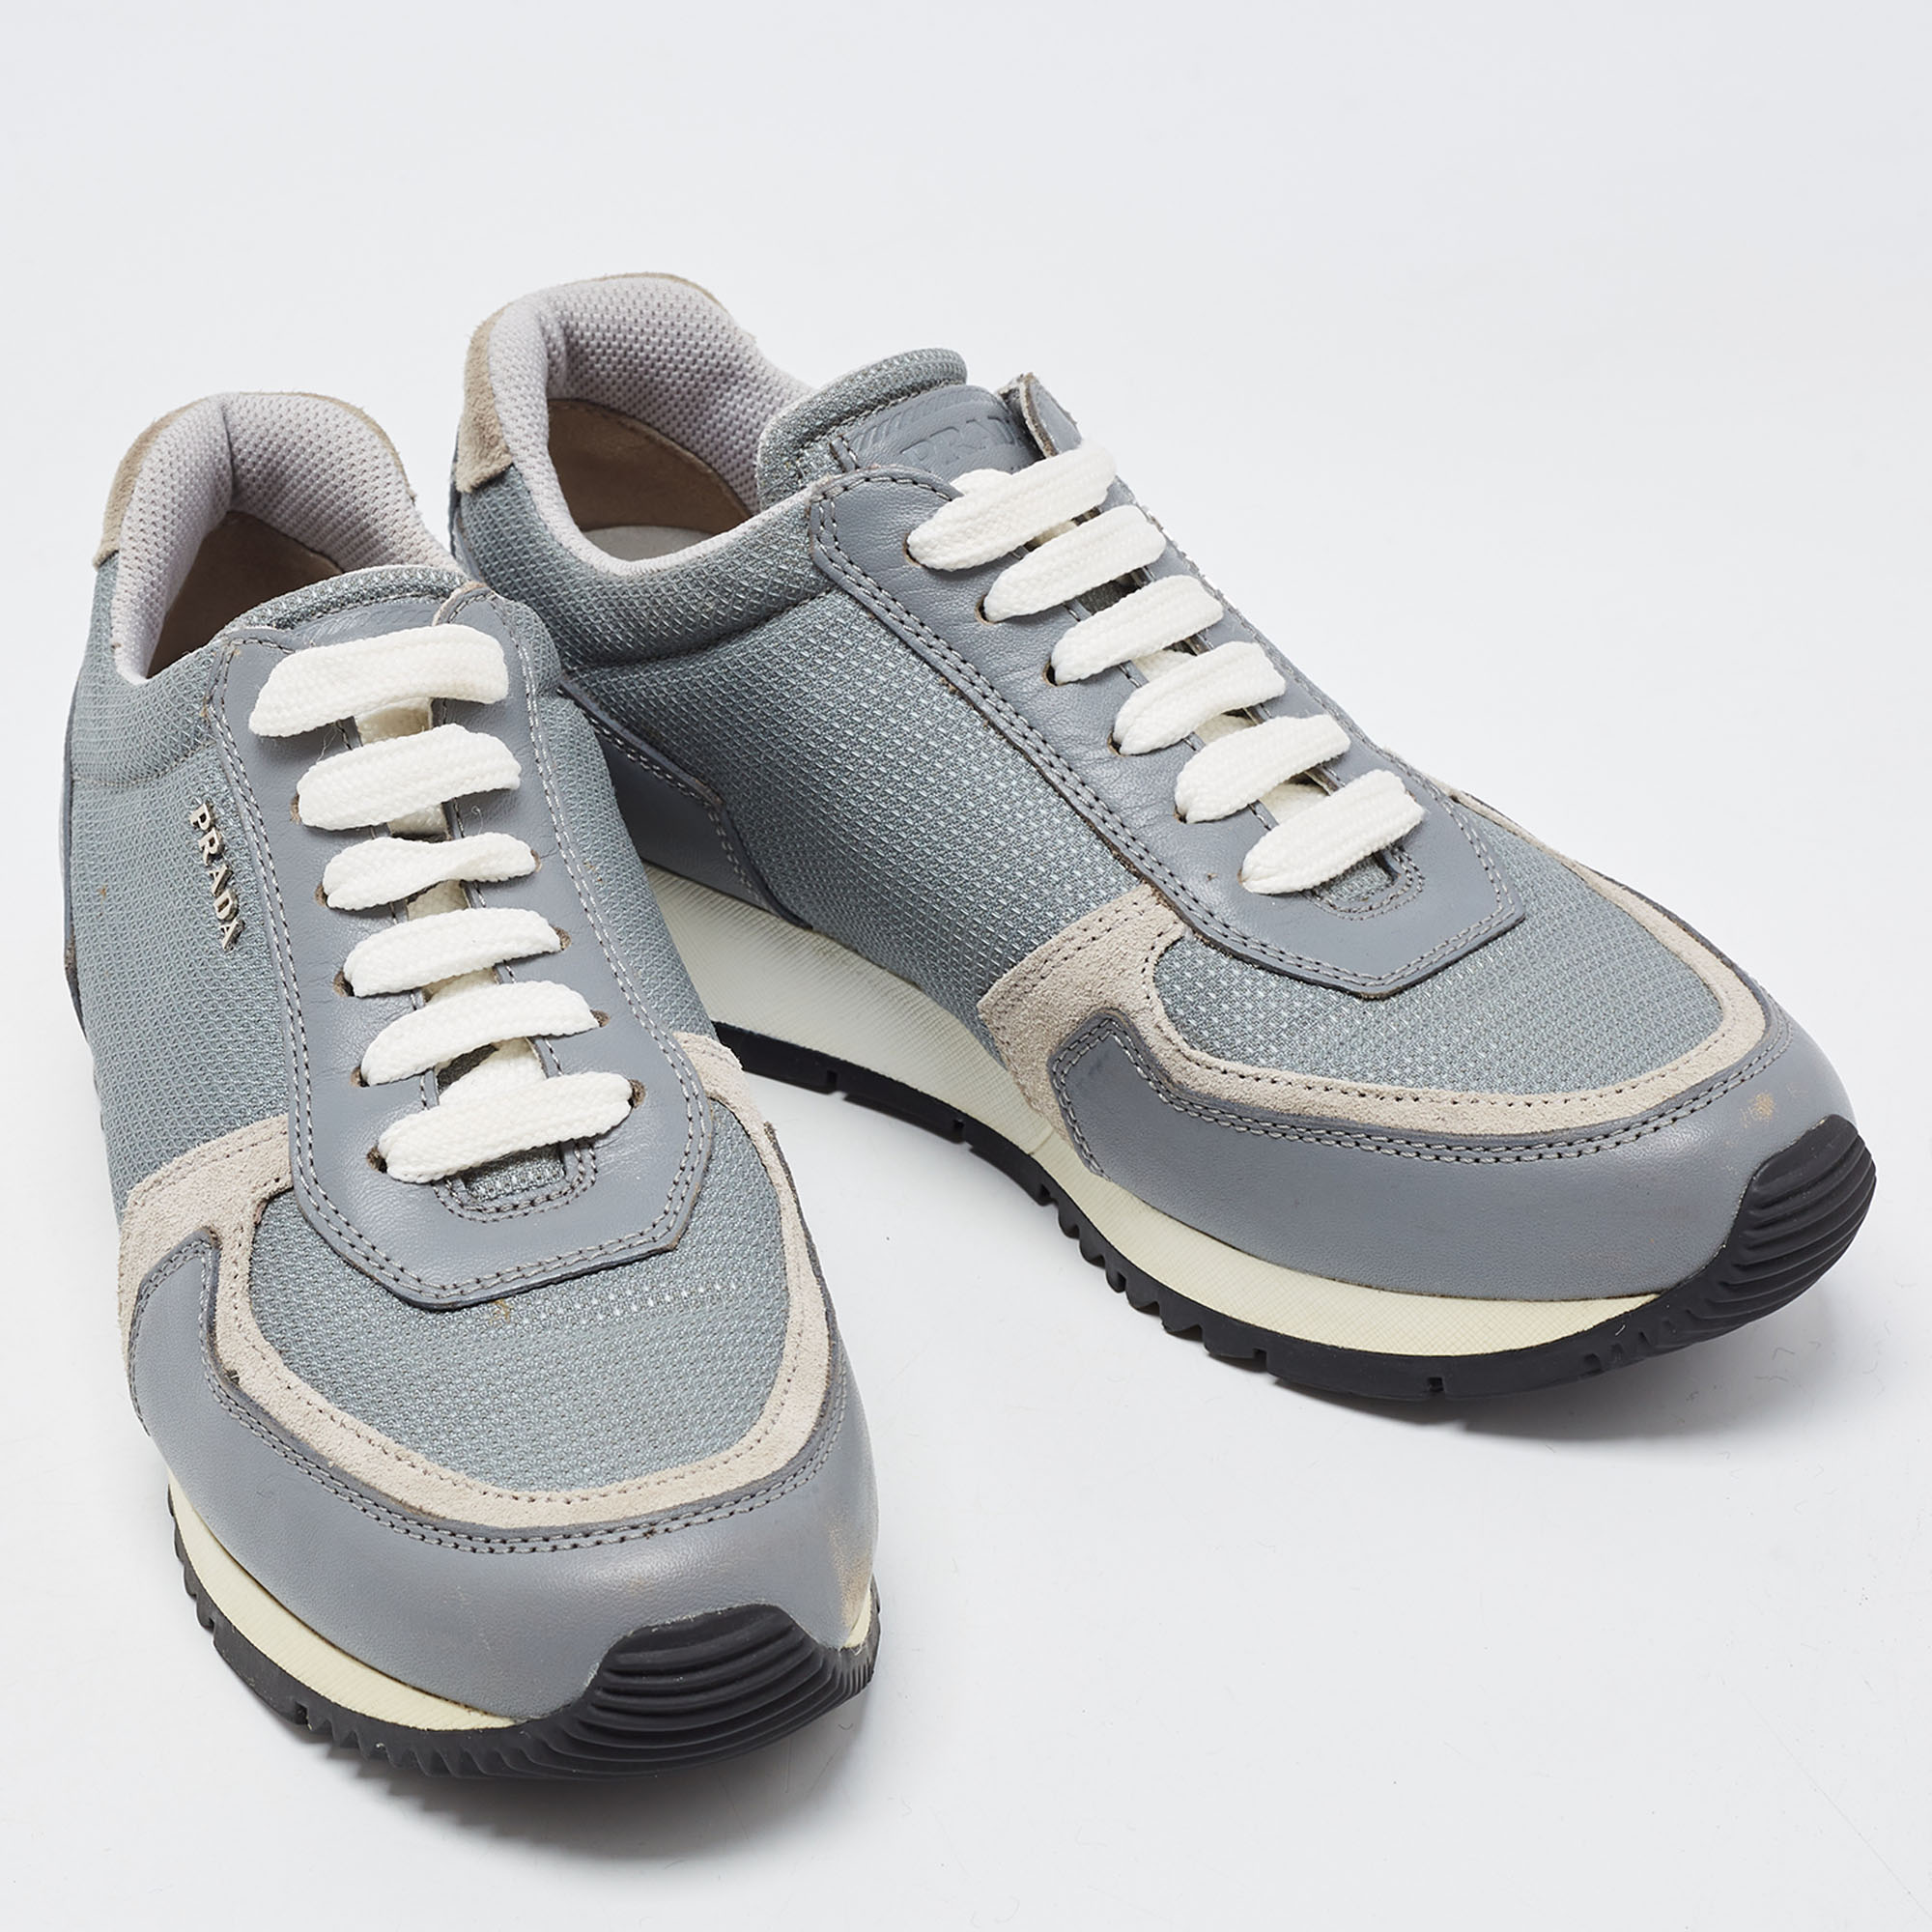 Prada Grey Mesh And Leather Low Top Sneakers Size 37.5